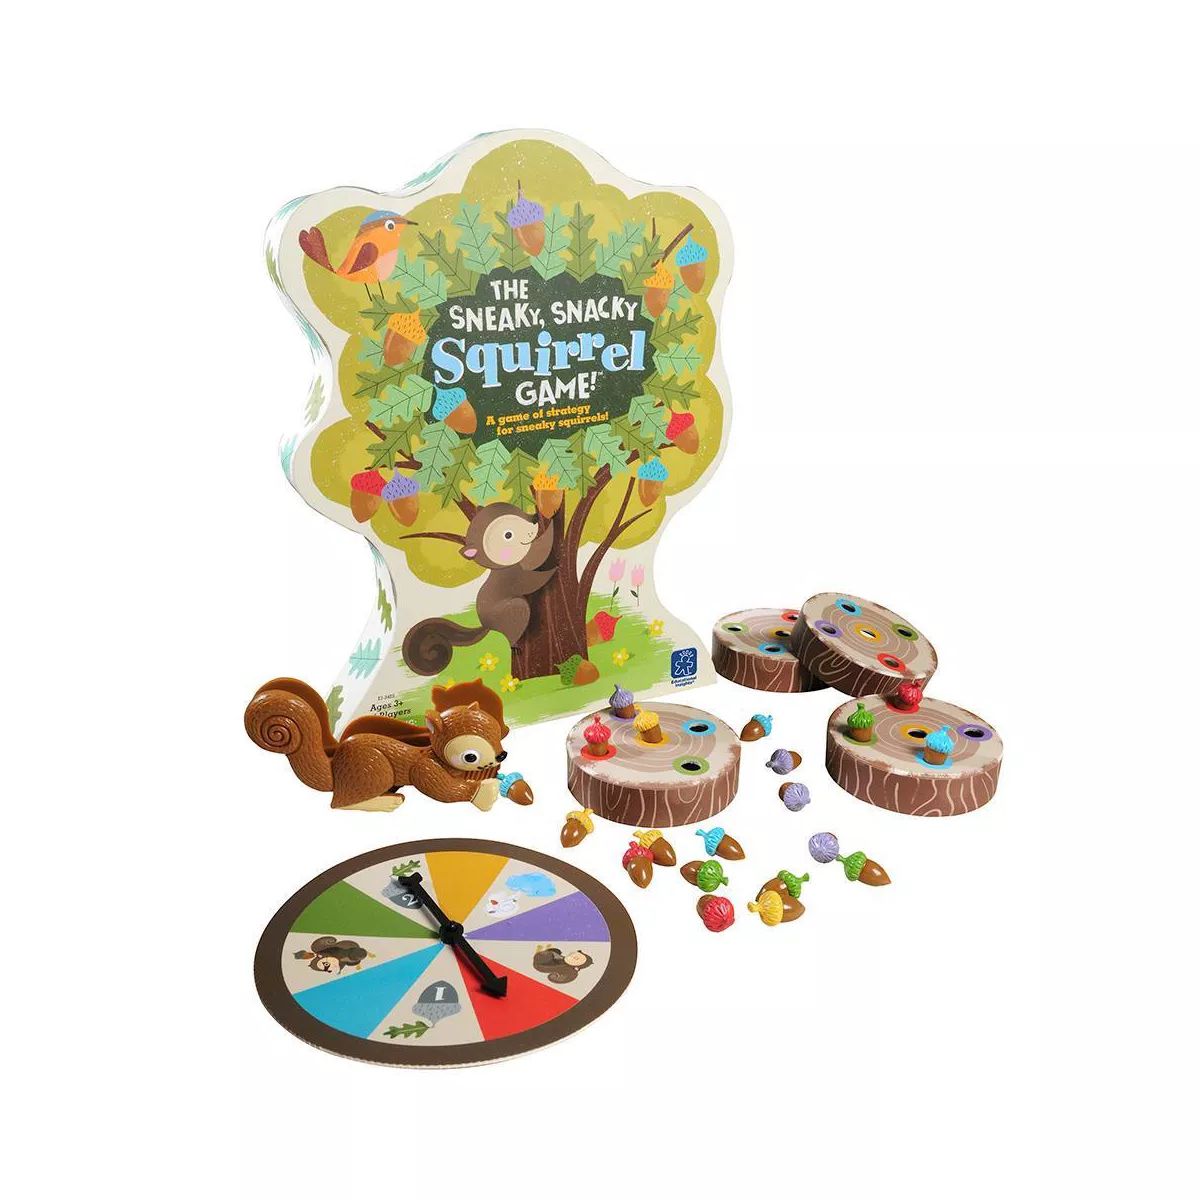 Educational Insights The Sneaky, Snacky Squirrel Game! | Target